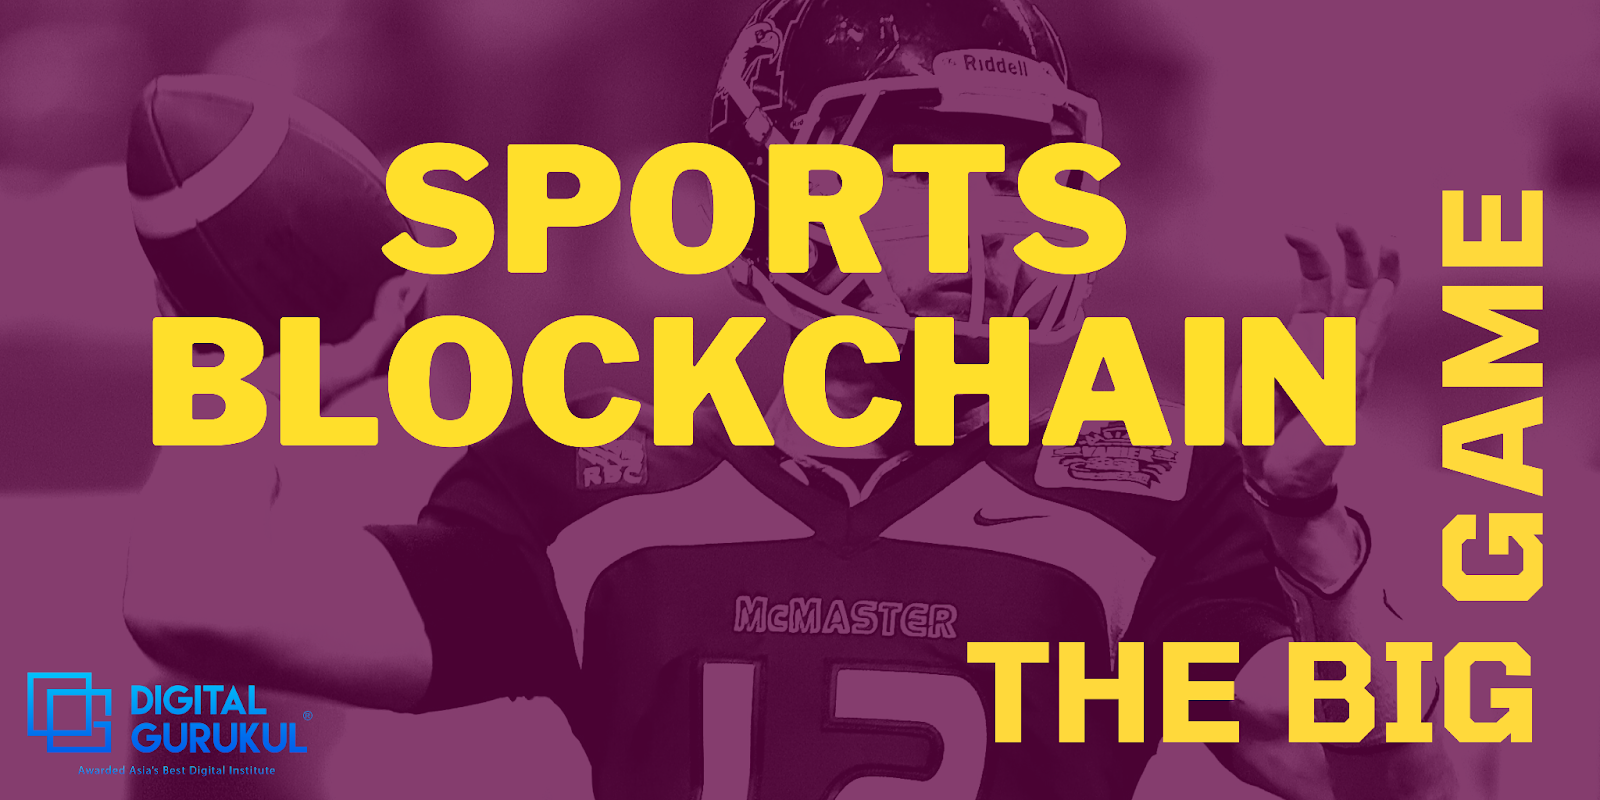 Top 8 Sports Blockchain Projects of 2022